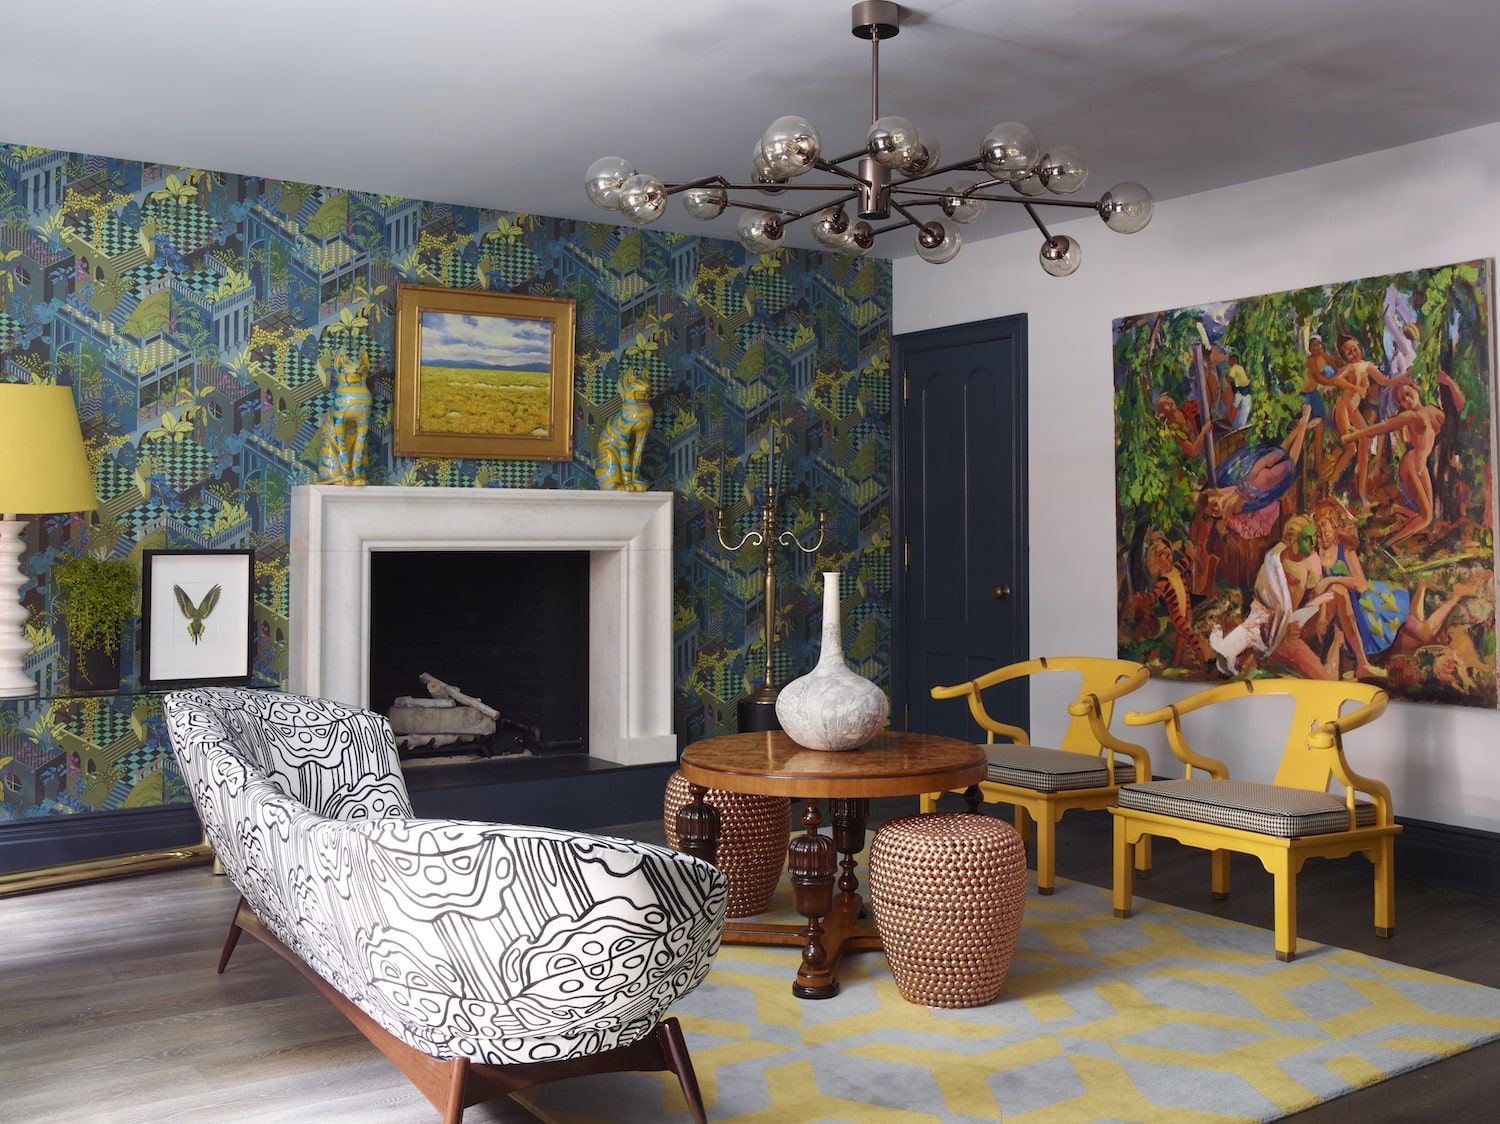 Rebekah Caudwell’s Eclectic New York Home